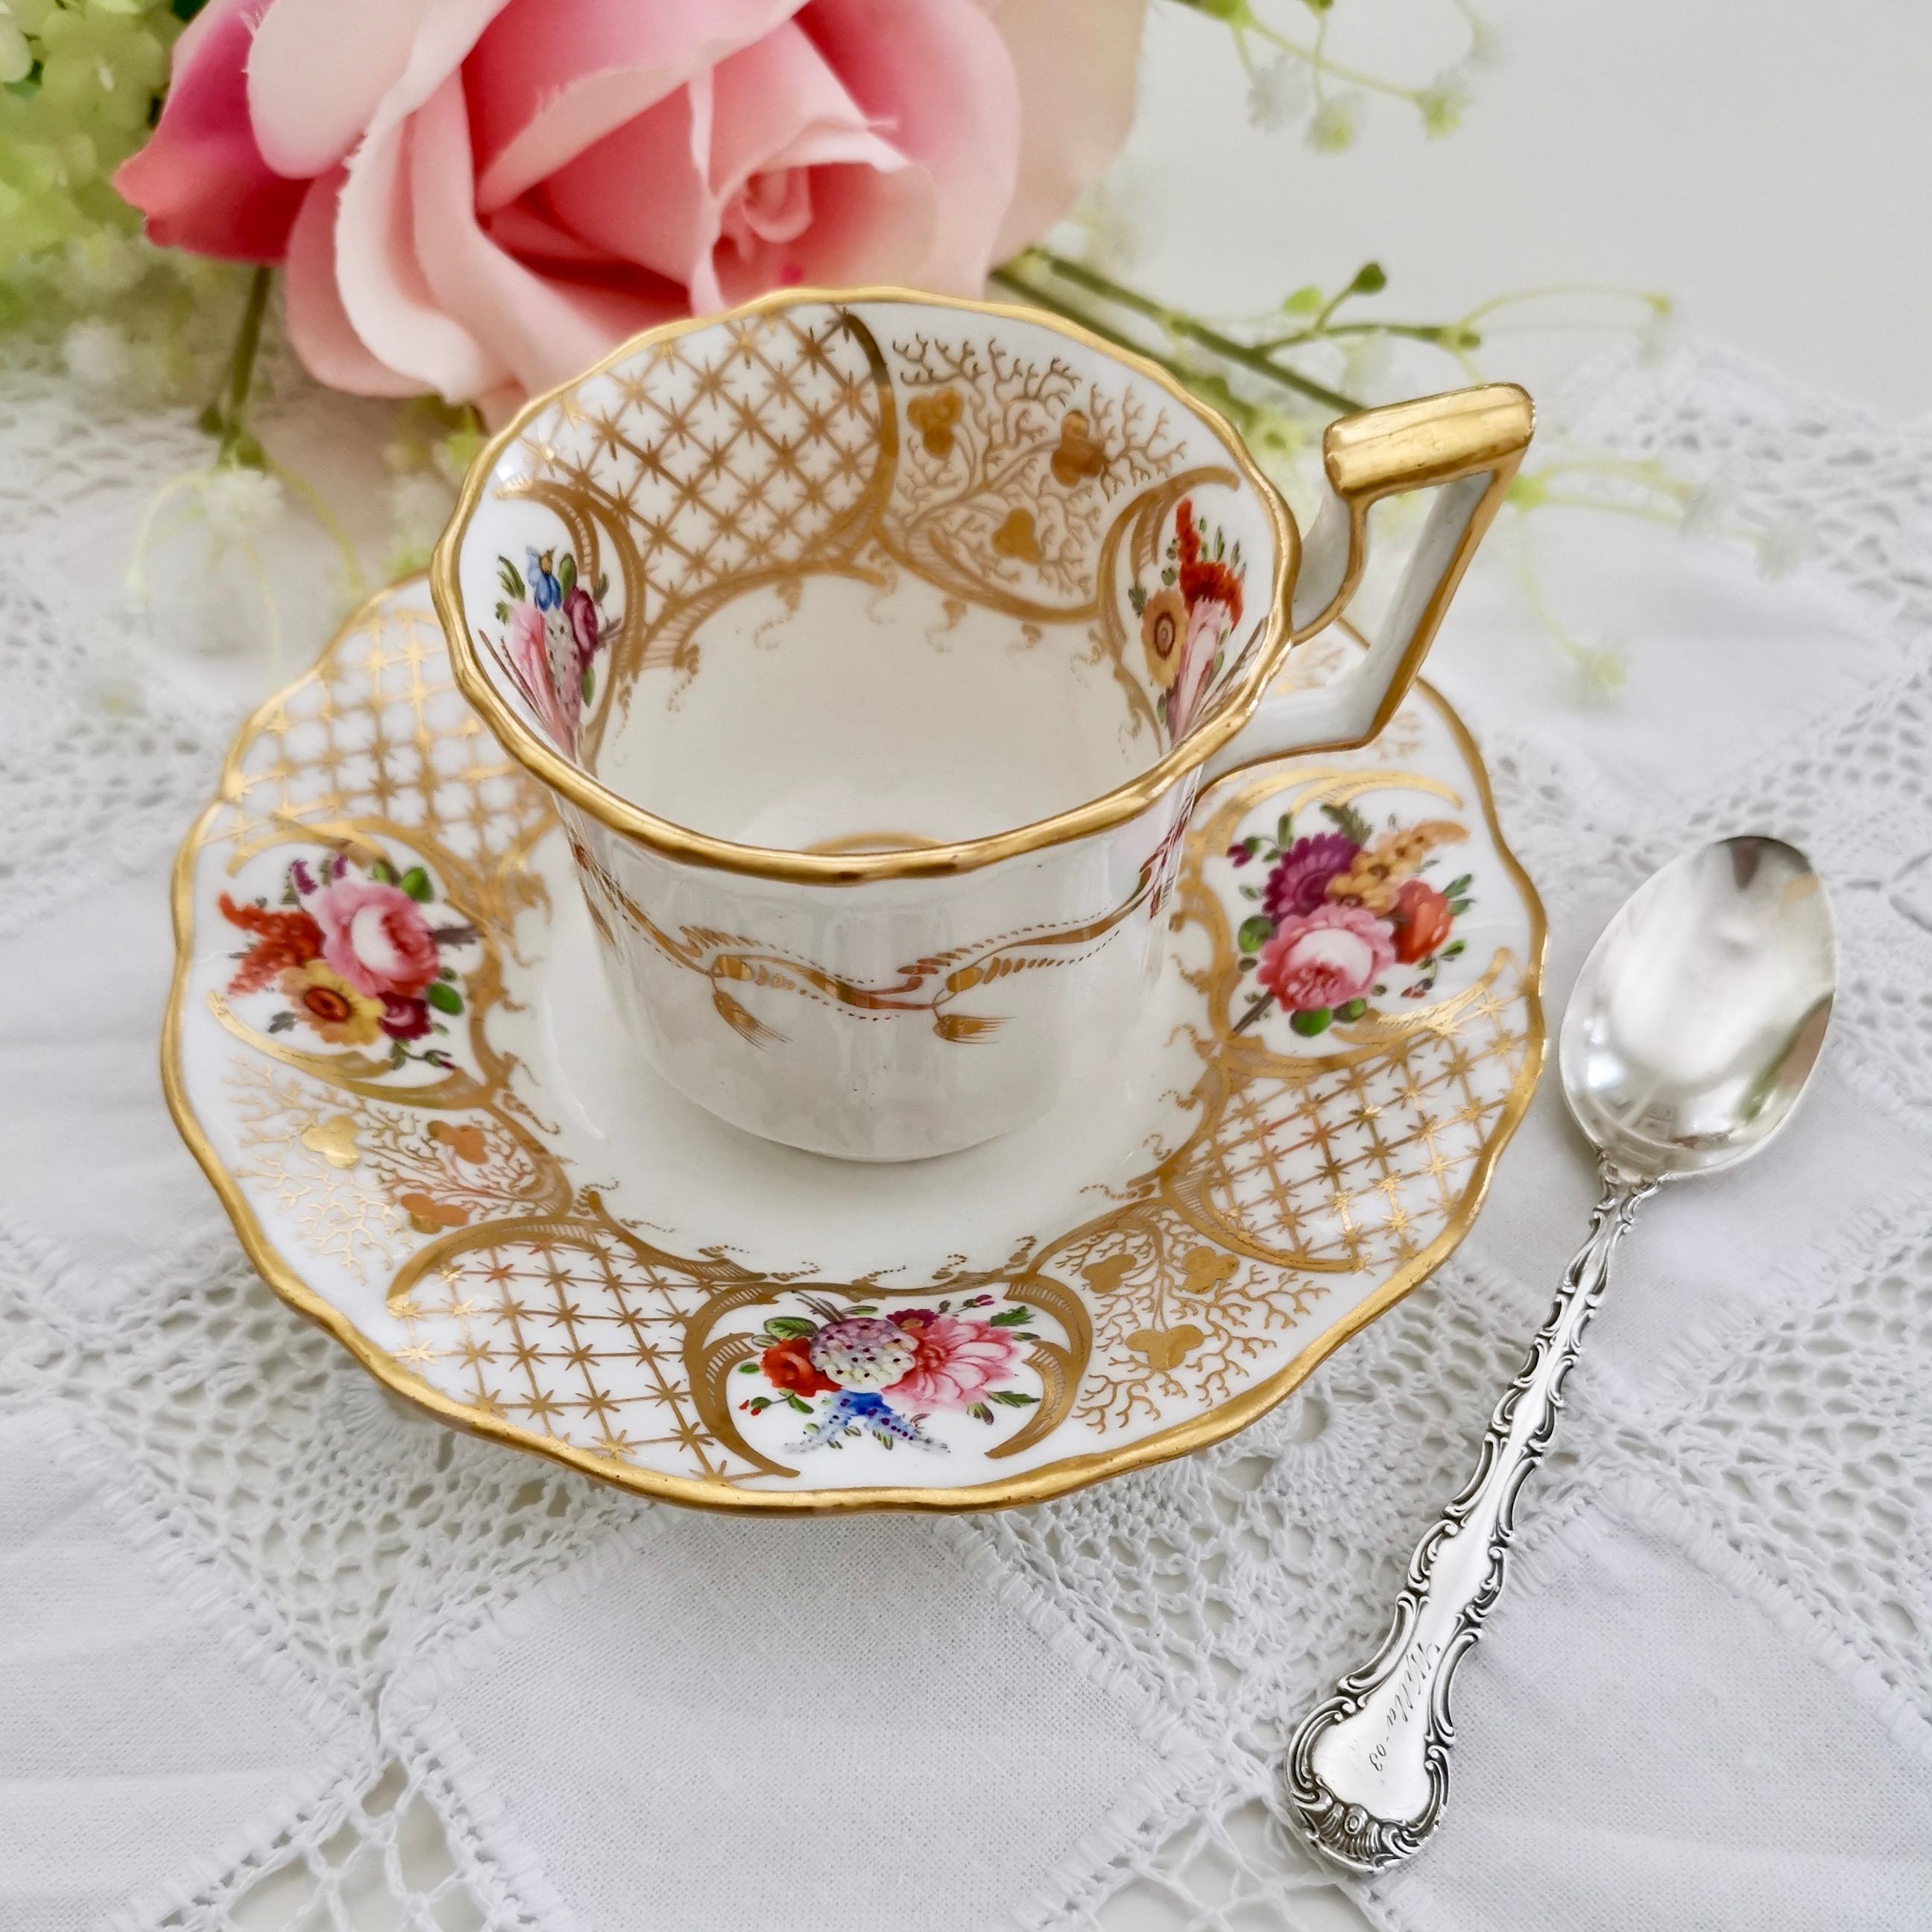 This is a beautifully decorated coffee cup and saucer made by Davenport in about 1825, which was the Regency era. The cup is white with a beautiful decoration of gilt and hand painted flowers, and it is shaped in the 